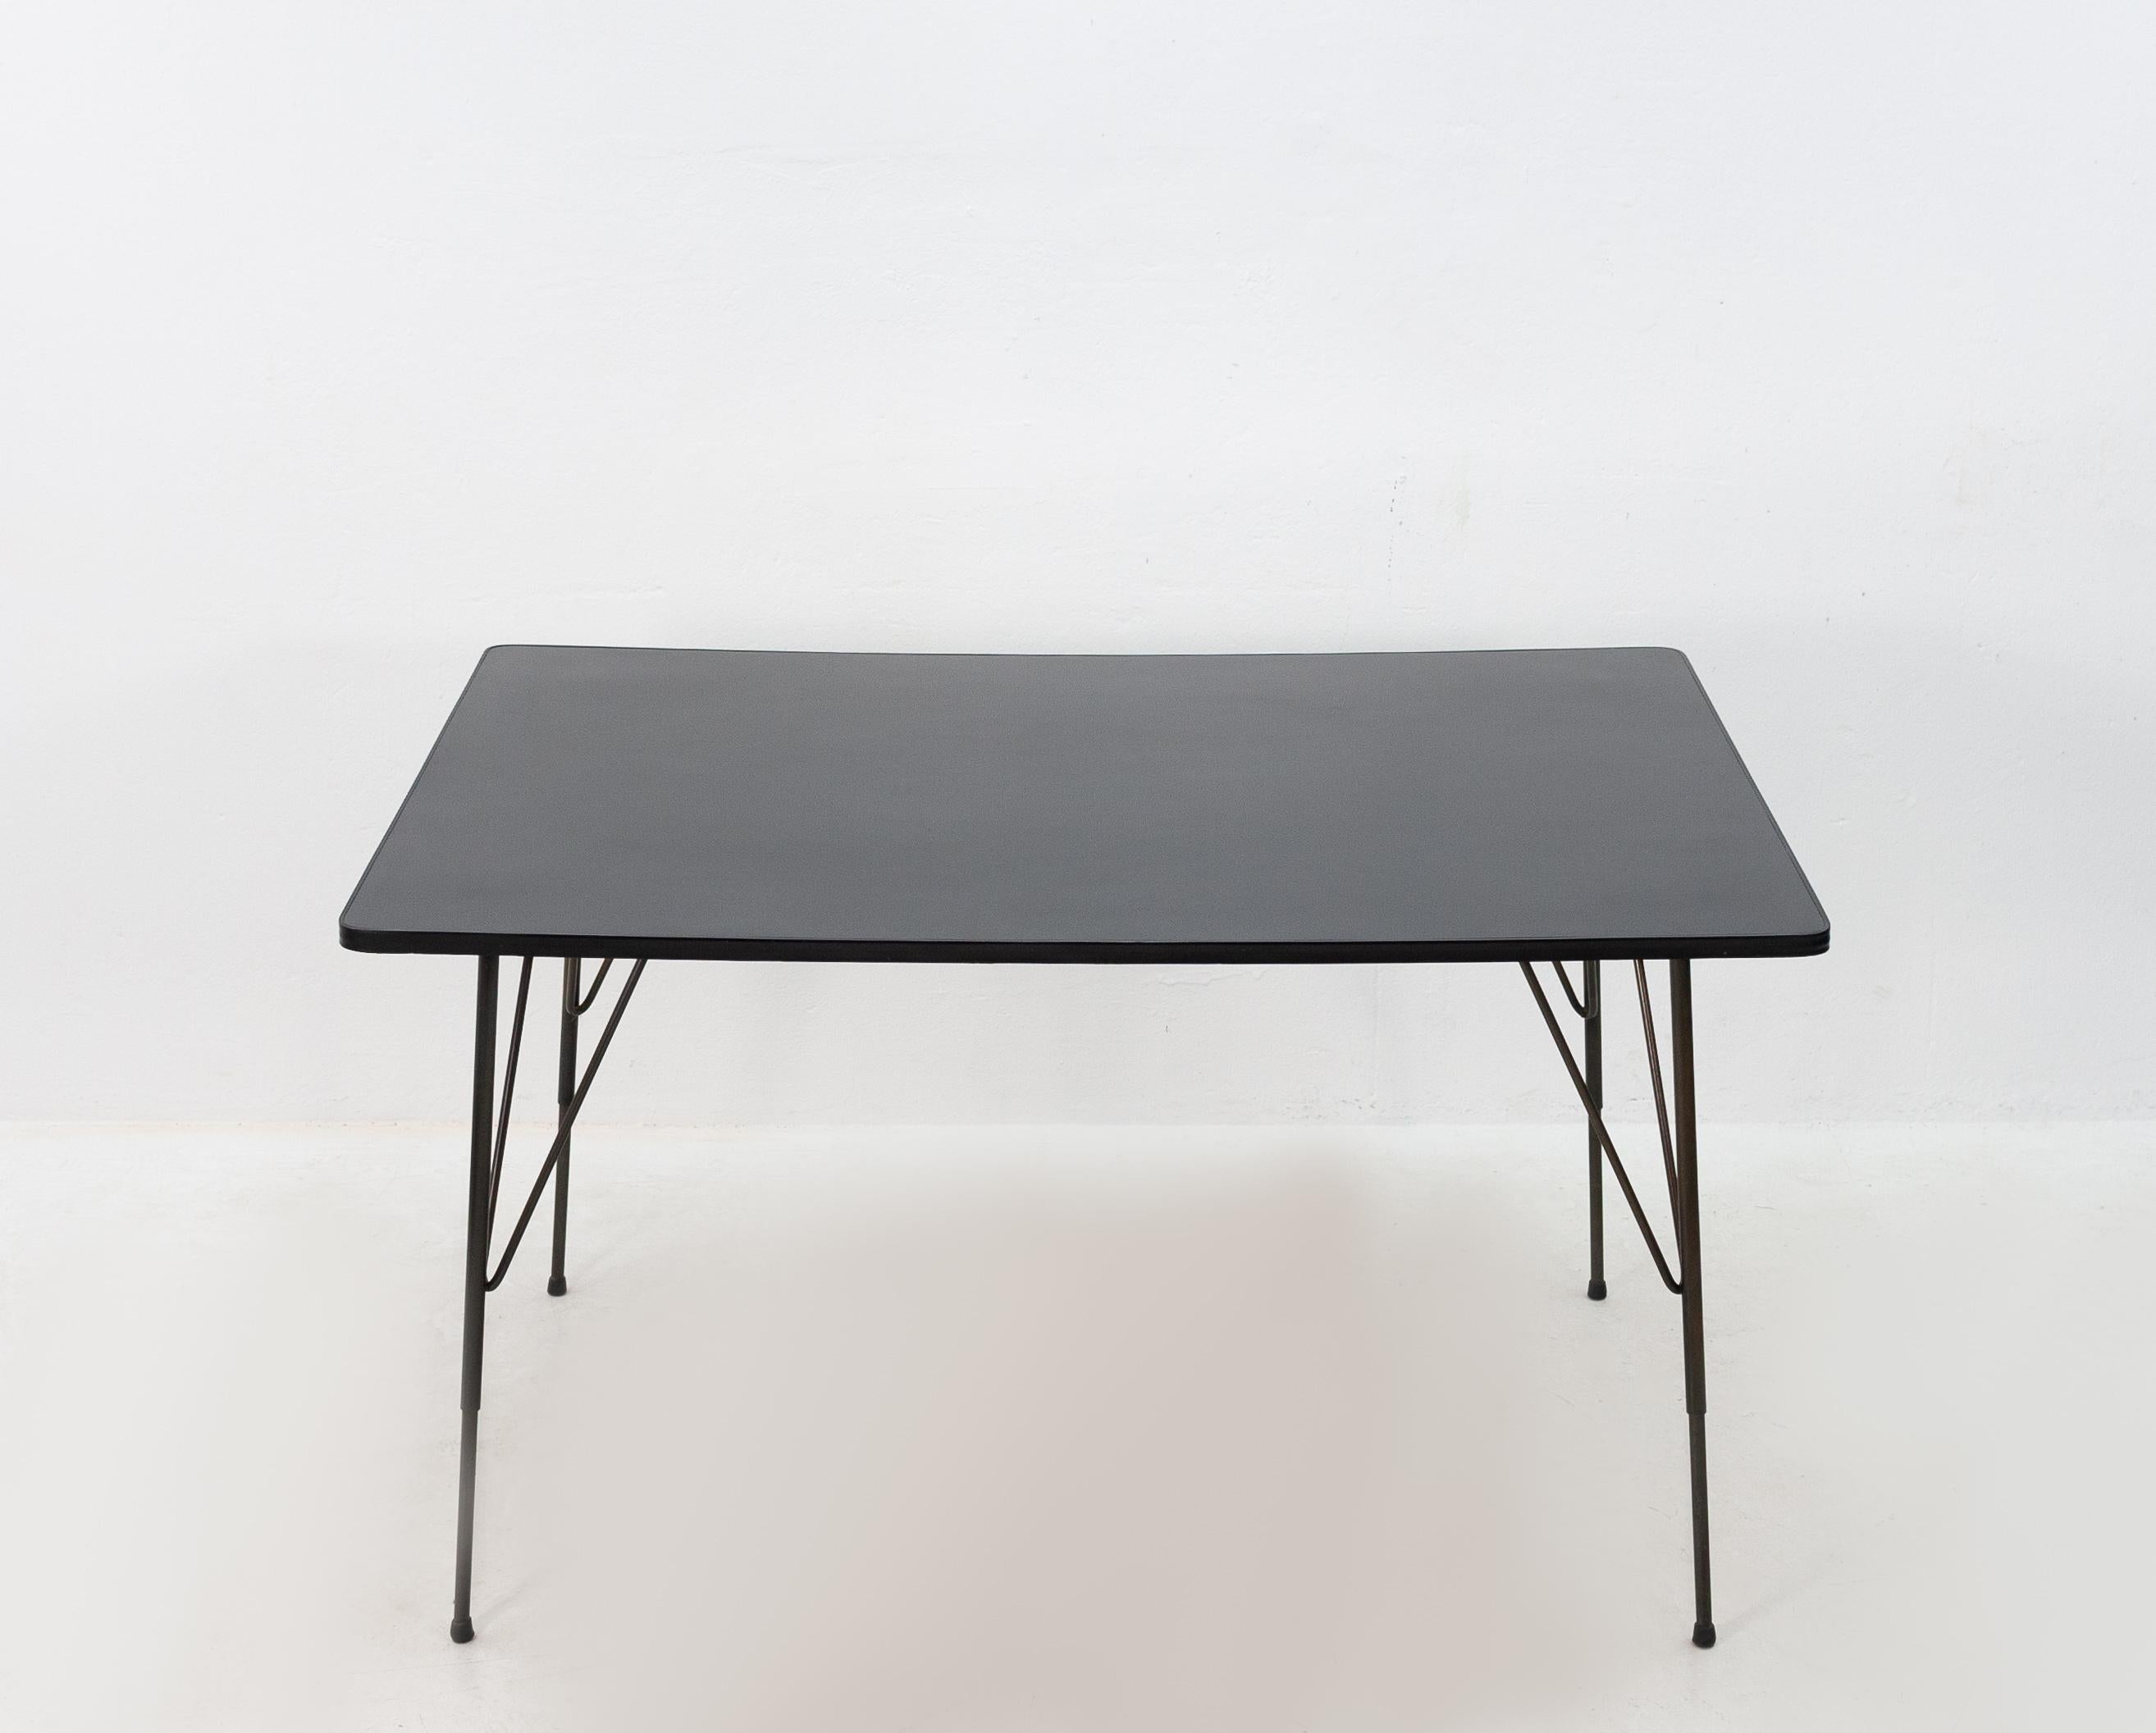 This table was designed by Rudolf Wolf for Elsrijk  steel furniture Rudolf Wolf is a .Dutch architect and designer .50s Holland .Very nice simple design .

This table is suitable for use as a desk or dining table and it is in very good condition.